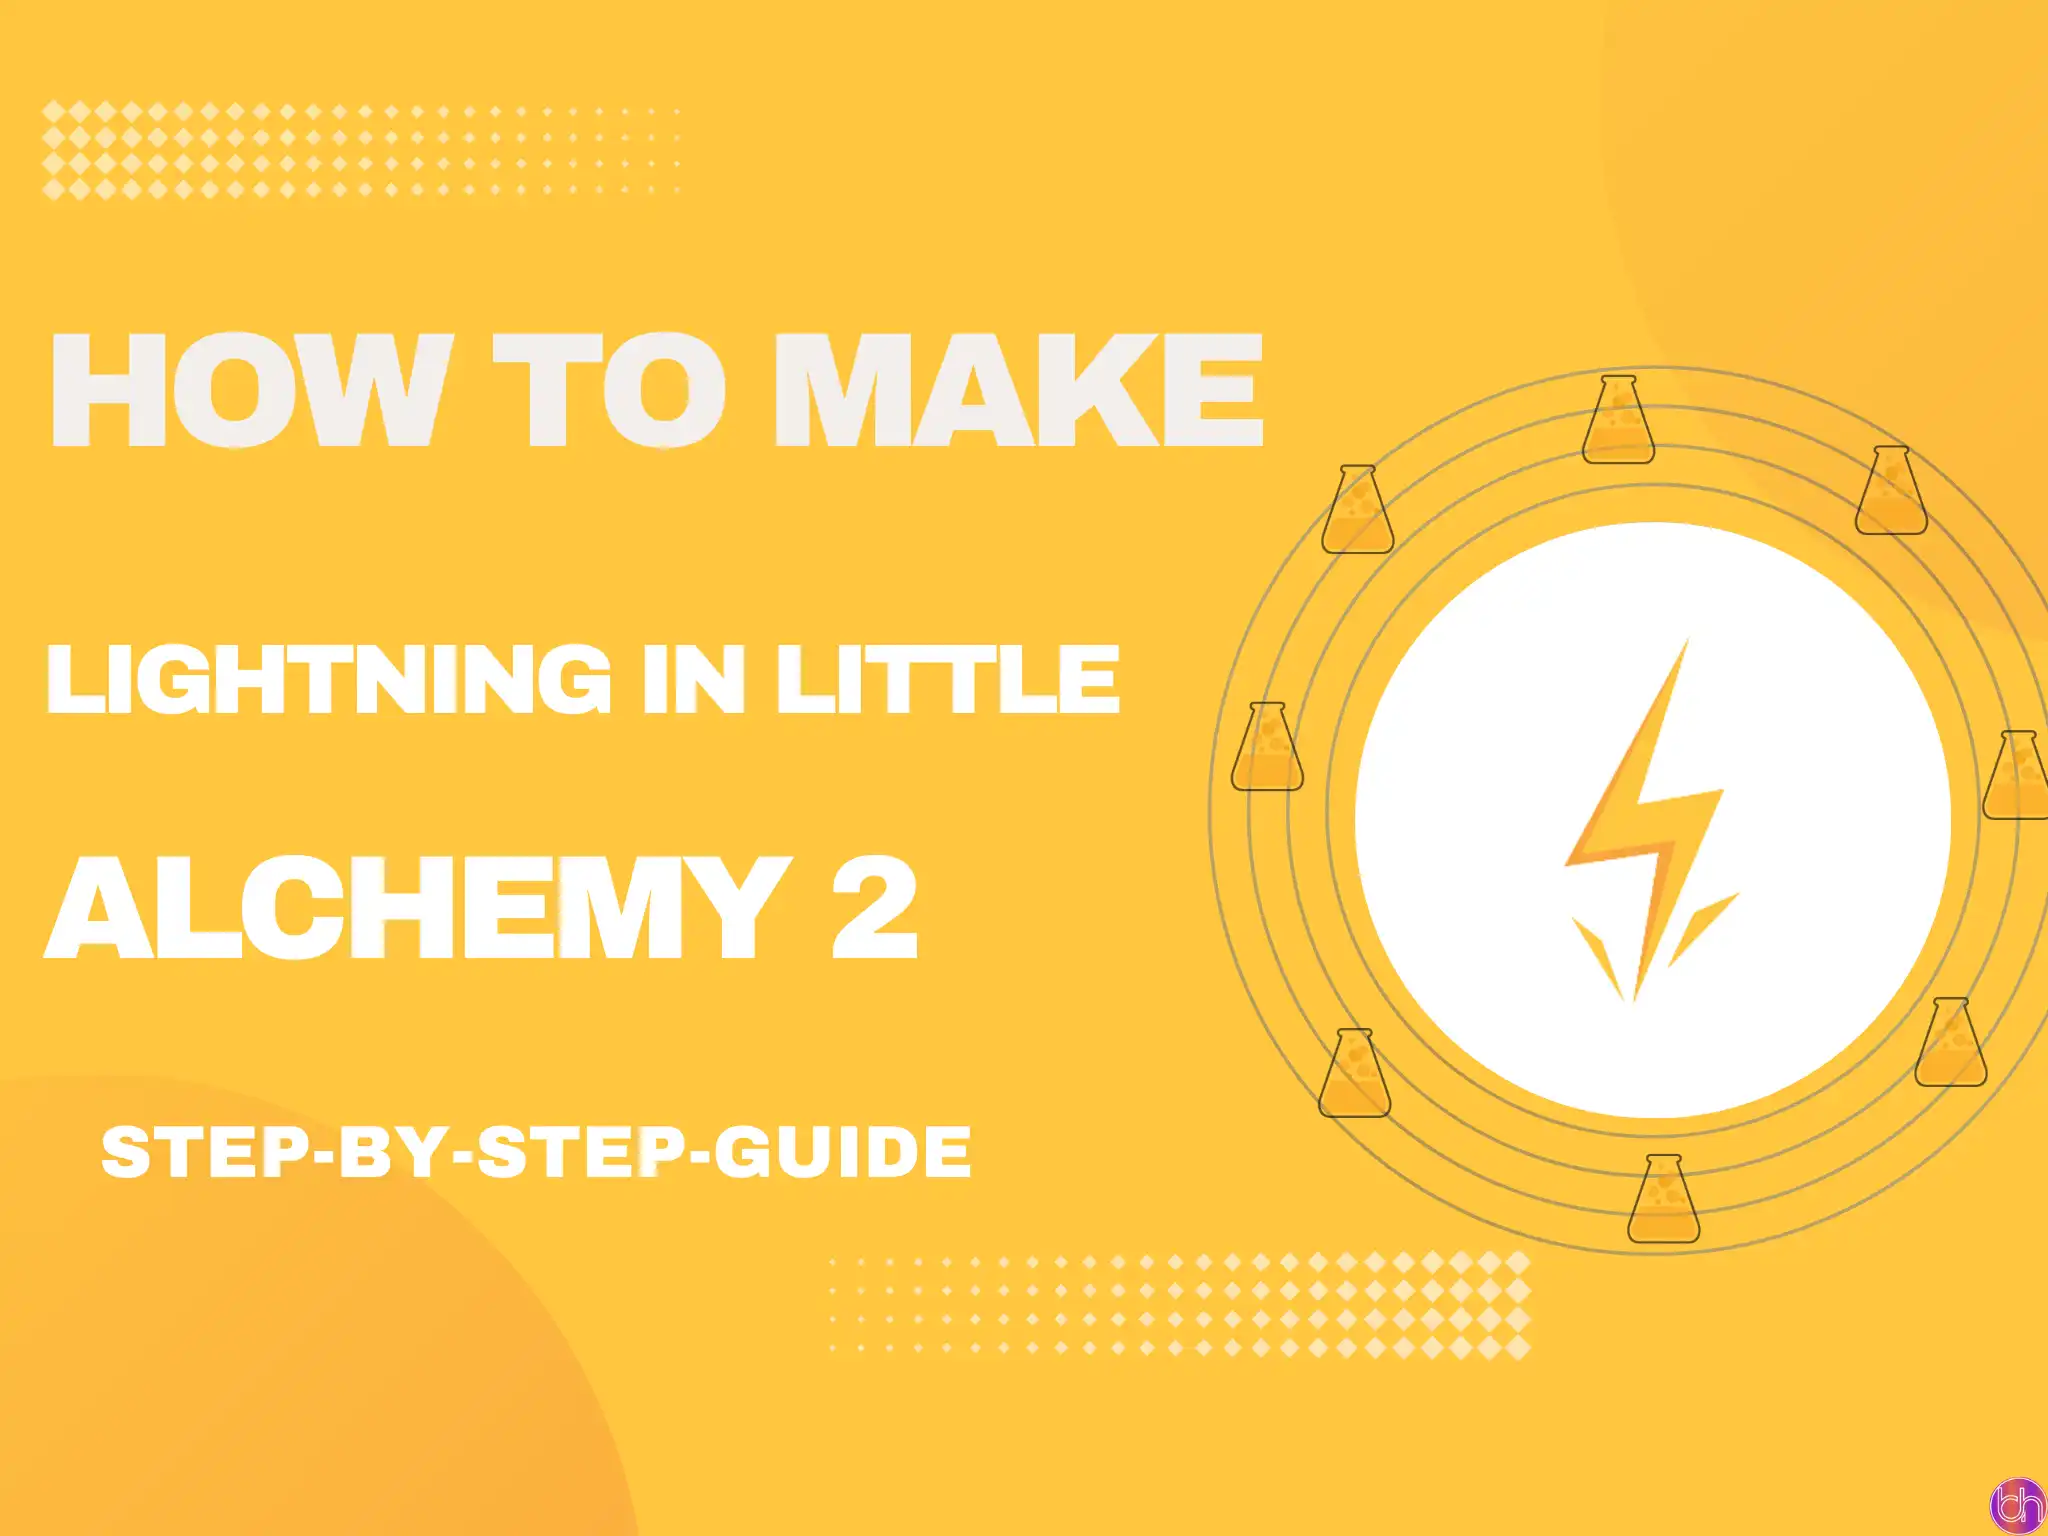 How to make Lightning in Little Alchemy 2